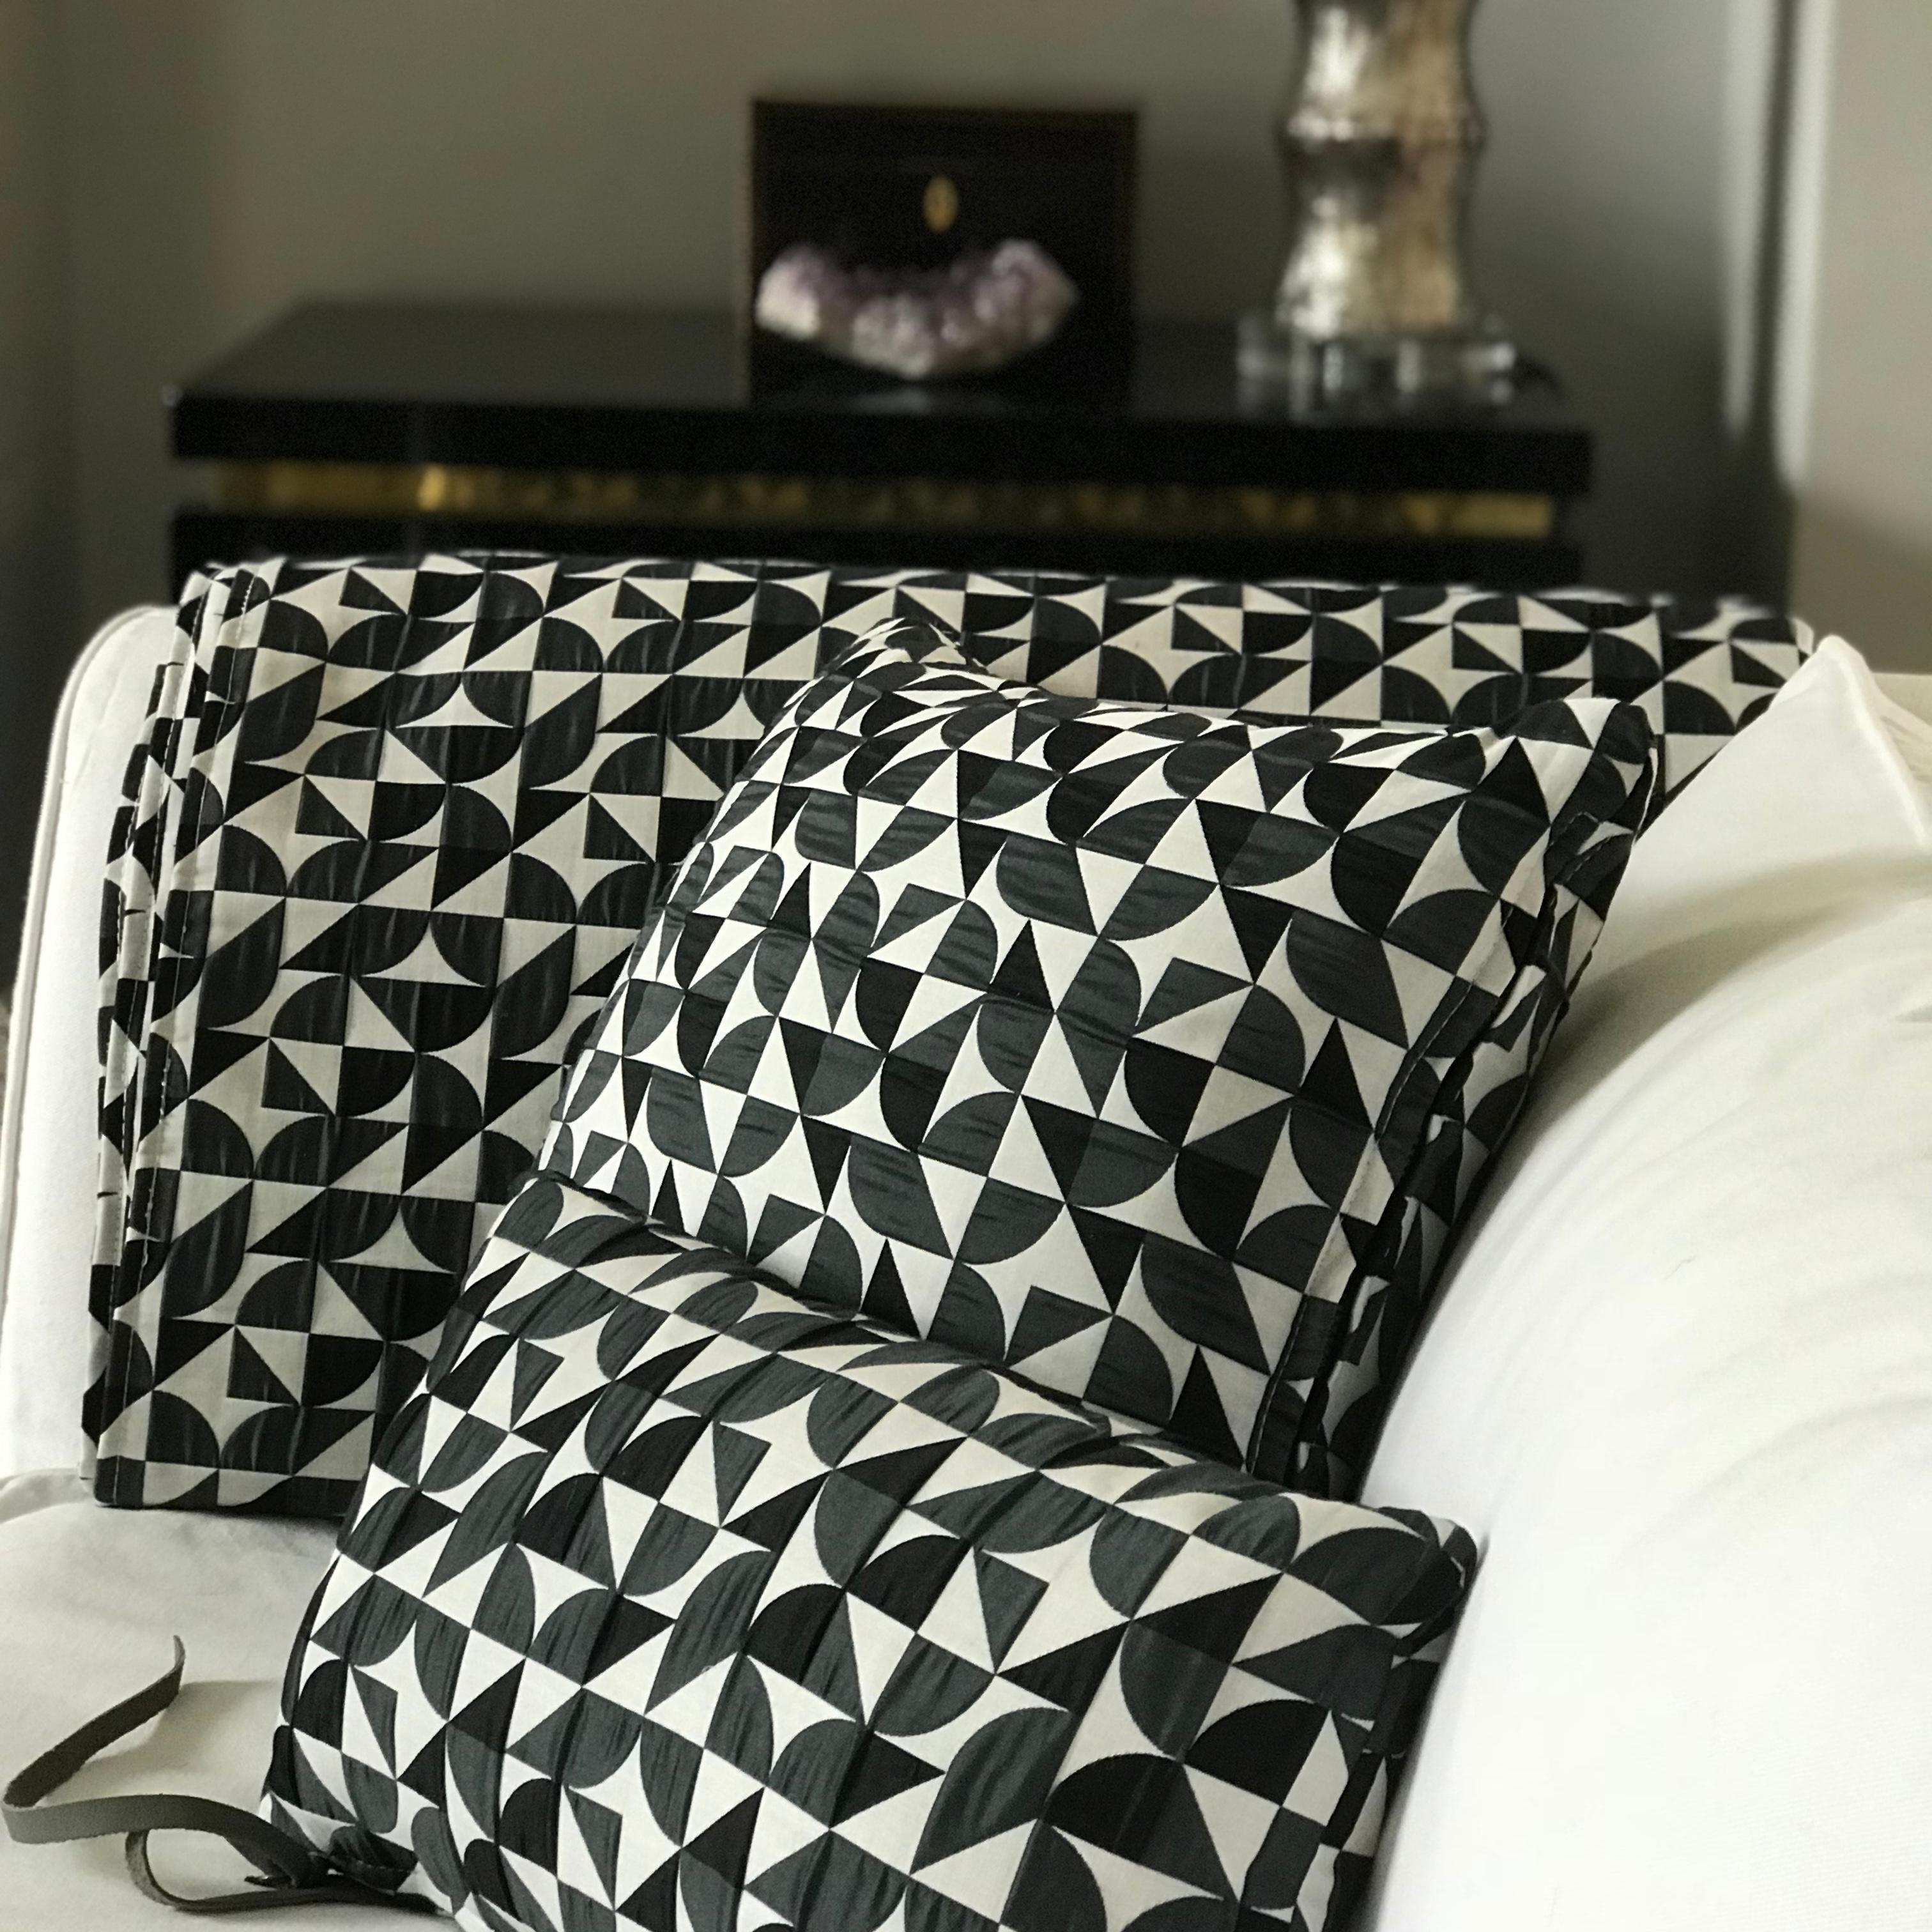 Brasilia Pattern Cushion Curvature Collection Inspired Brazilian Architecture 3